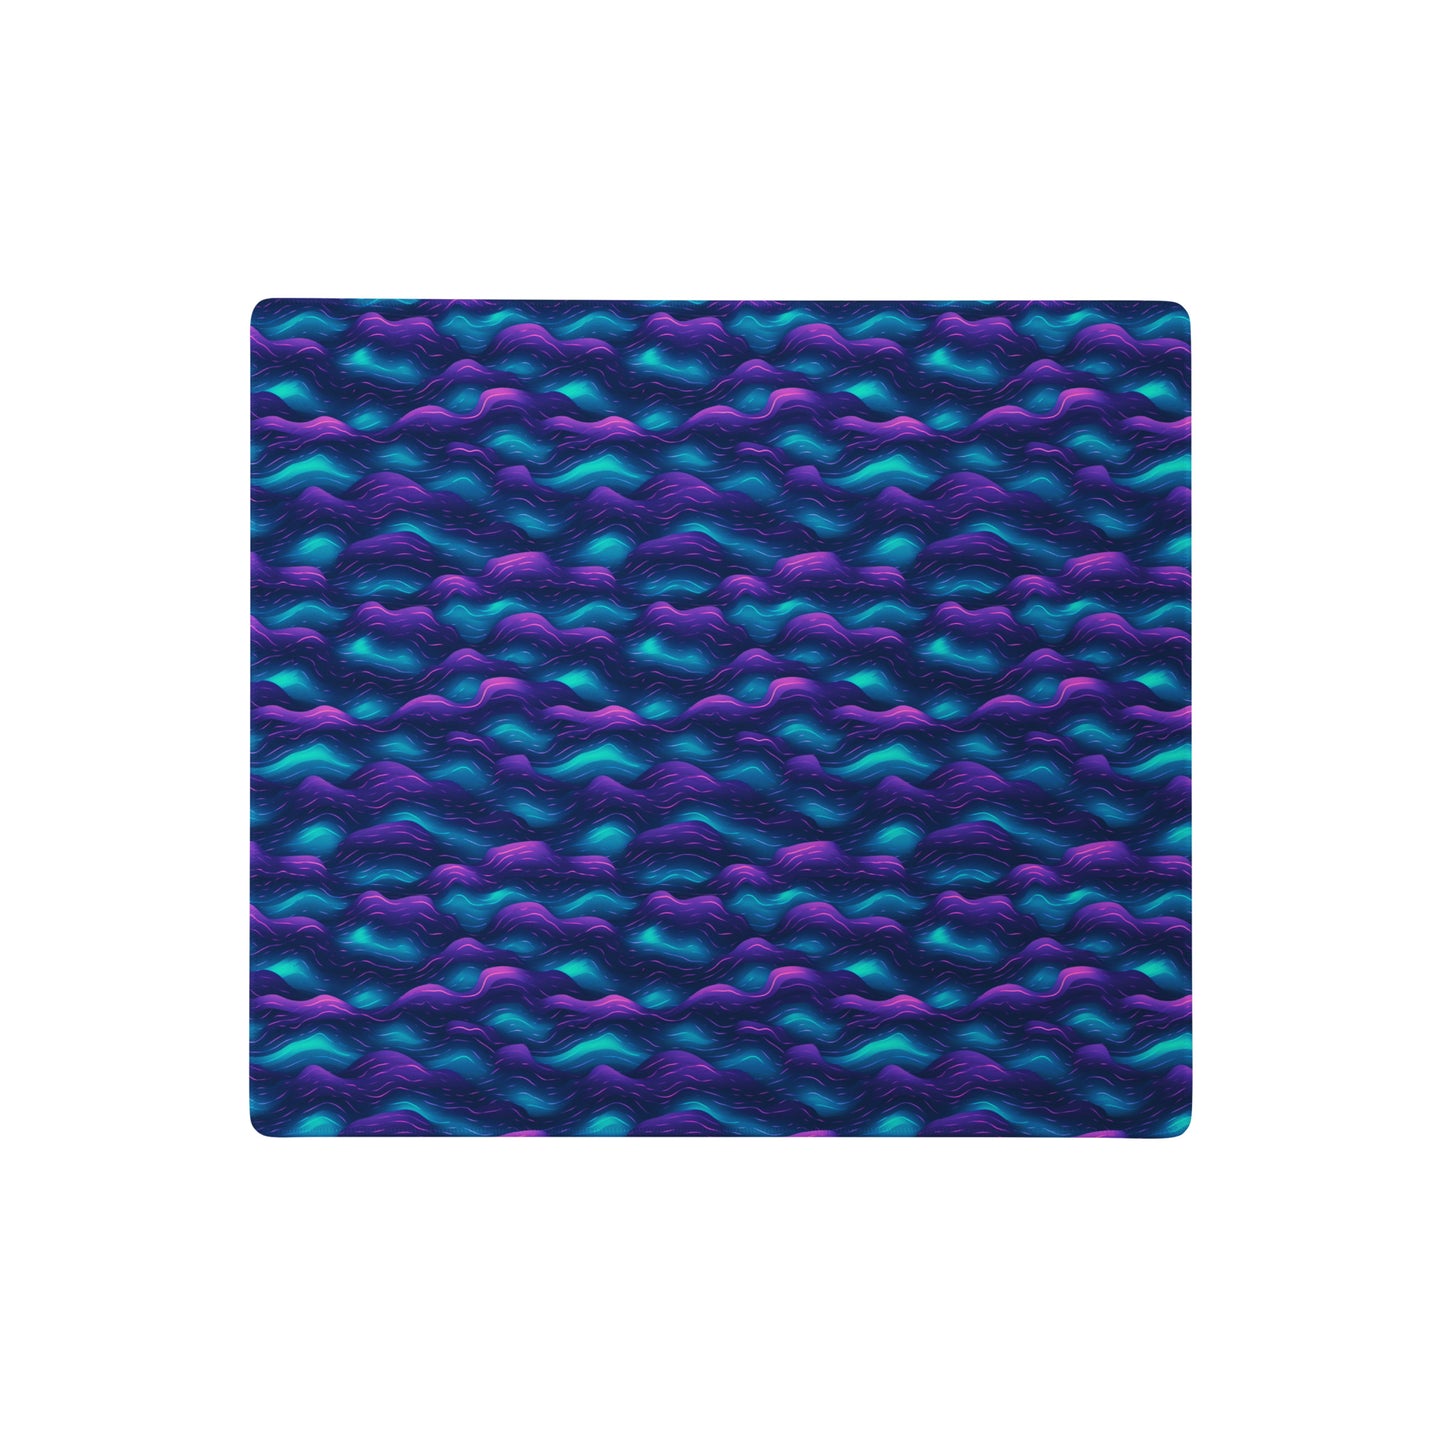 A 18" x 16" desk pad with blue and purple wave pattern.